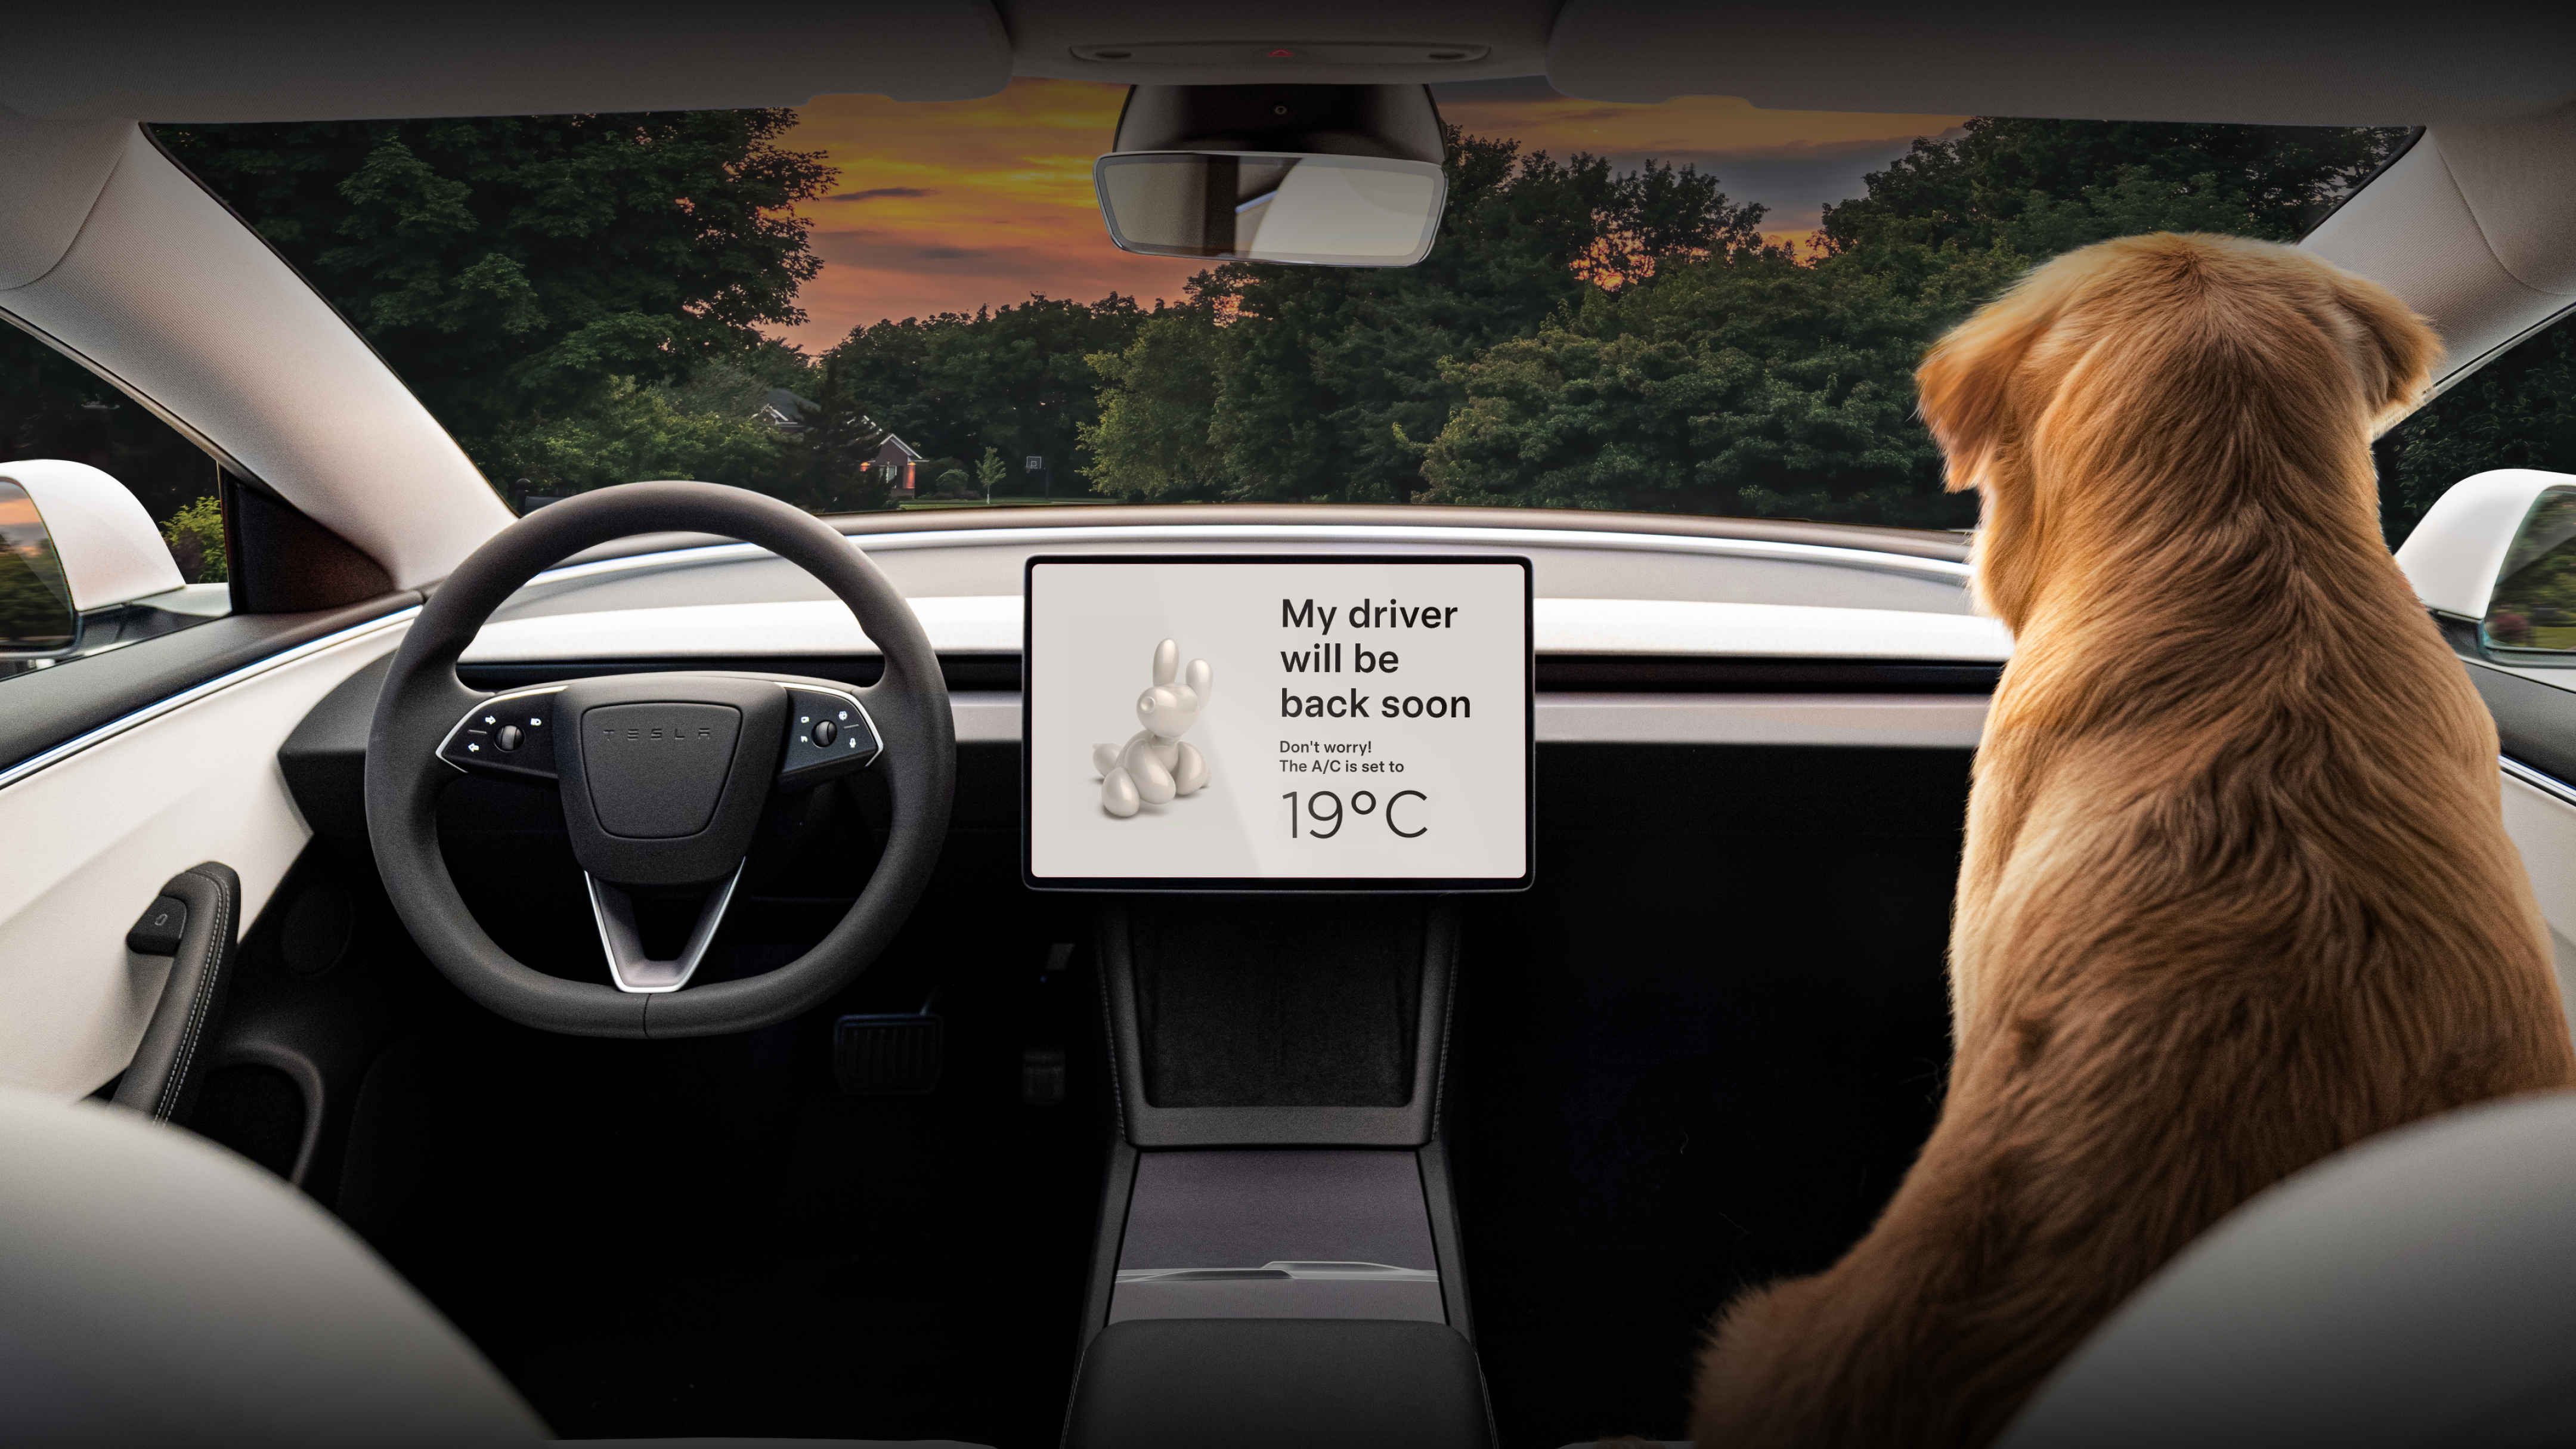 Center touchscreen displaying 'My driver will be back soon' with a golden retriever on the shotgun seat.